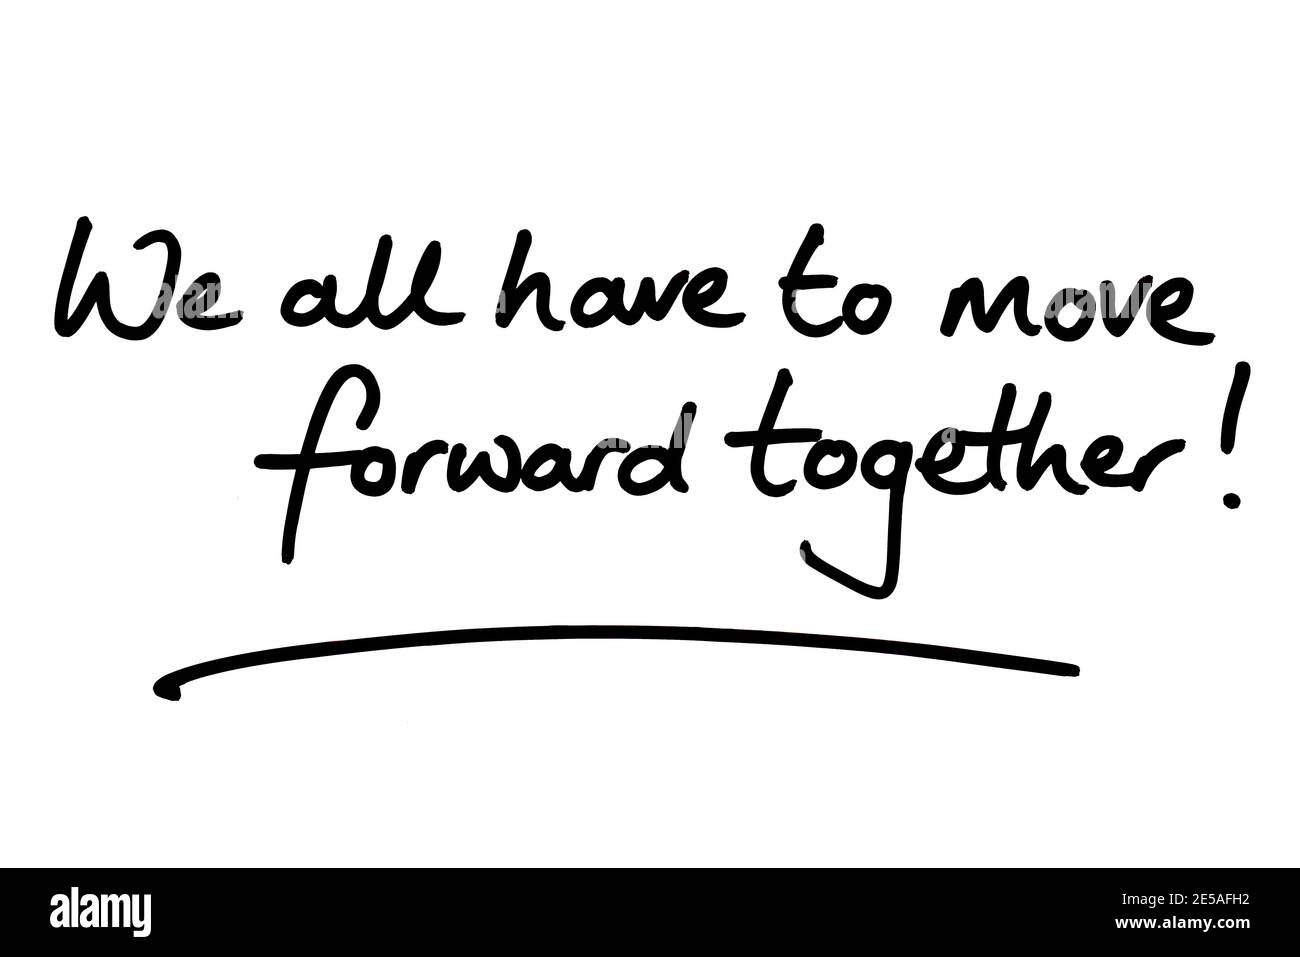 We have to move forward together! handwritten on a white background. Stock Photo